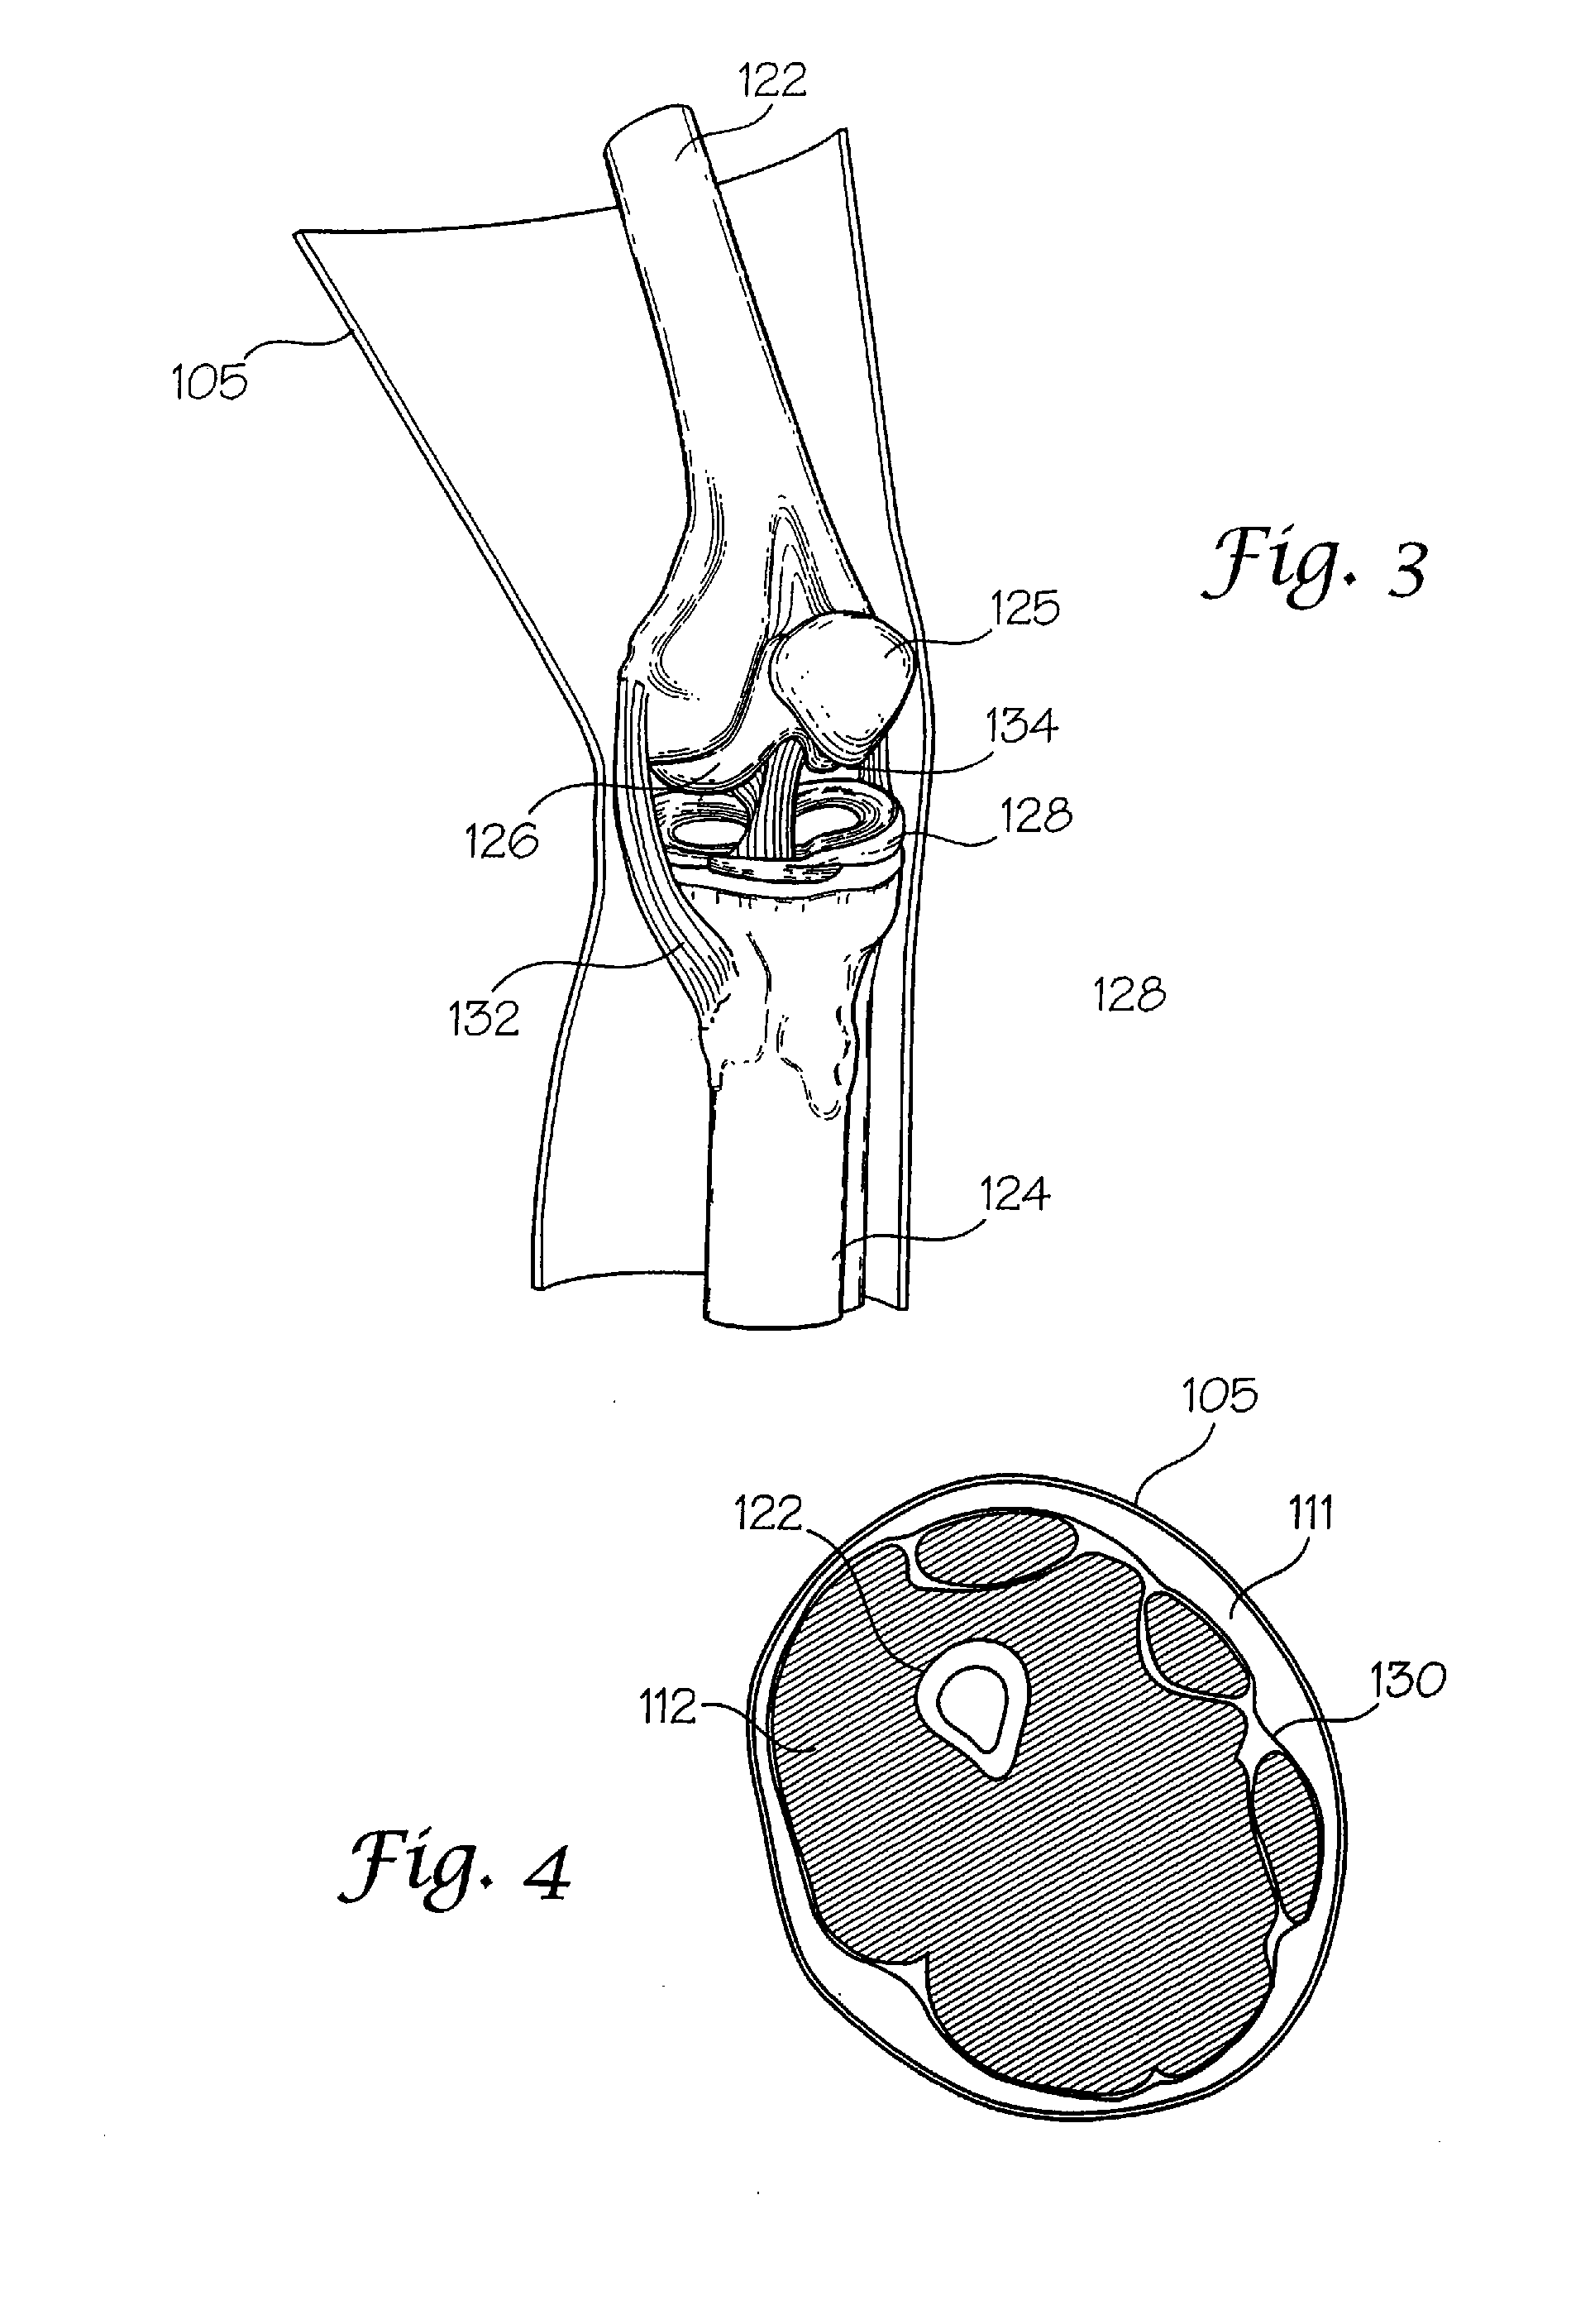 Joint replica models and methods of using same for testing medical devices